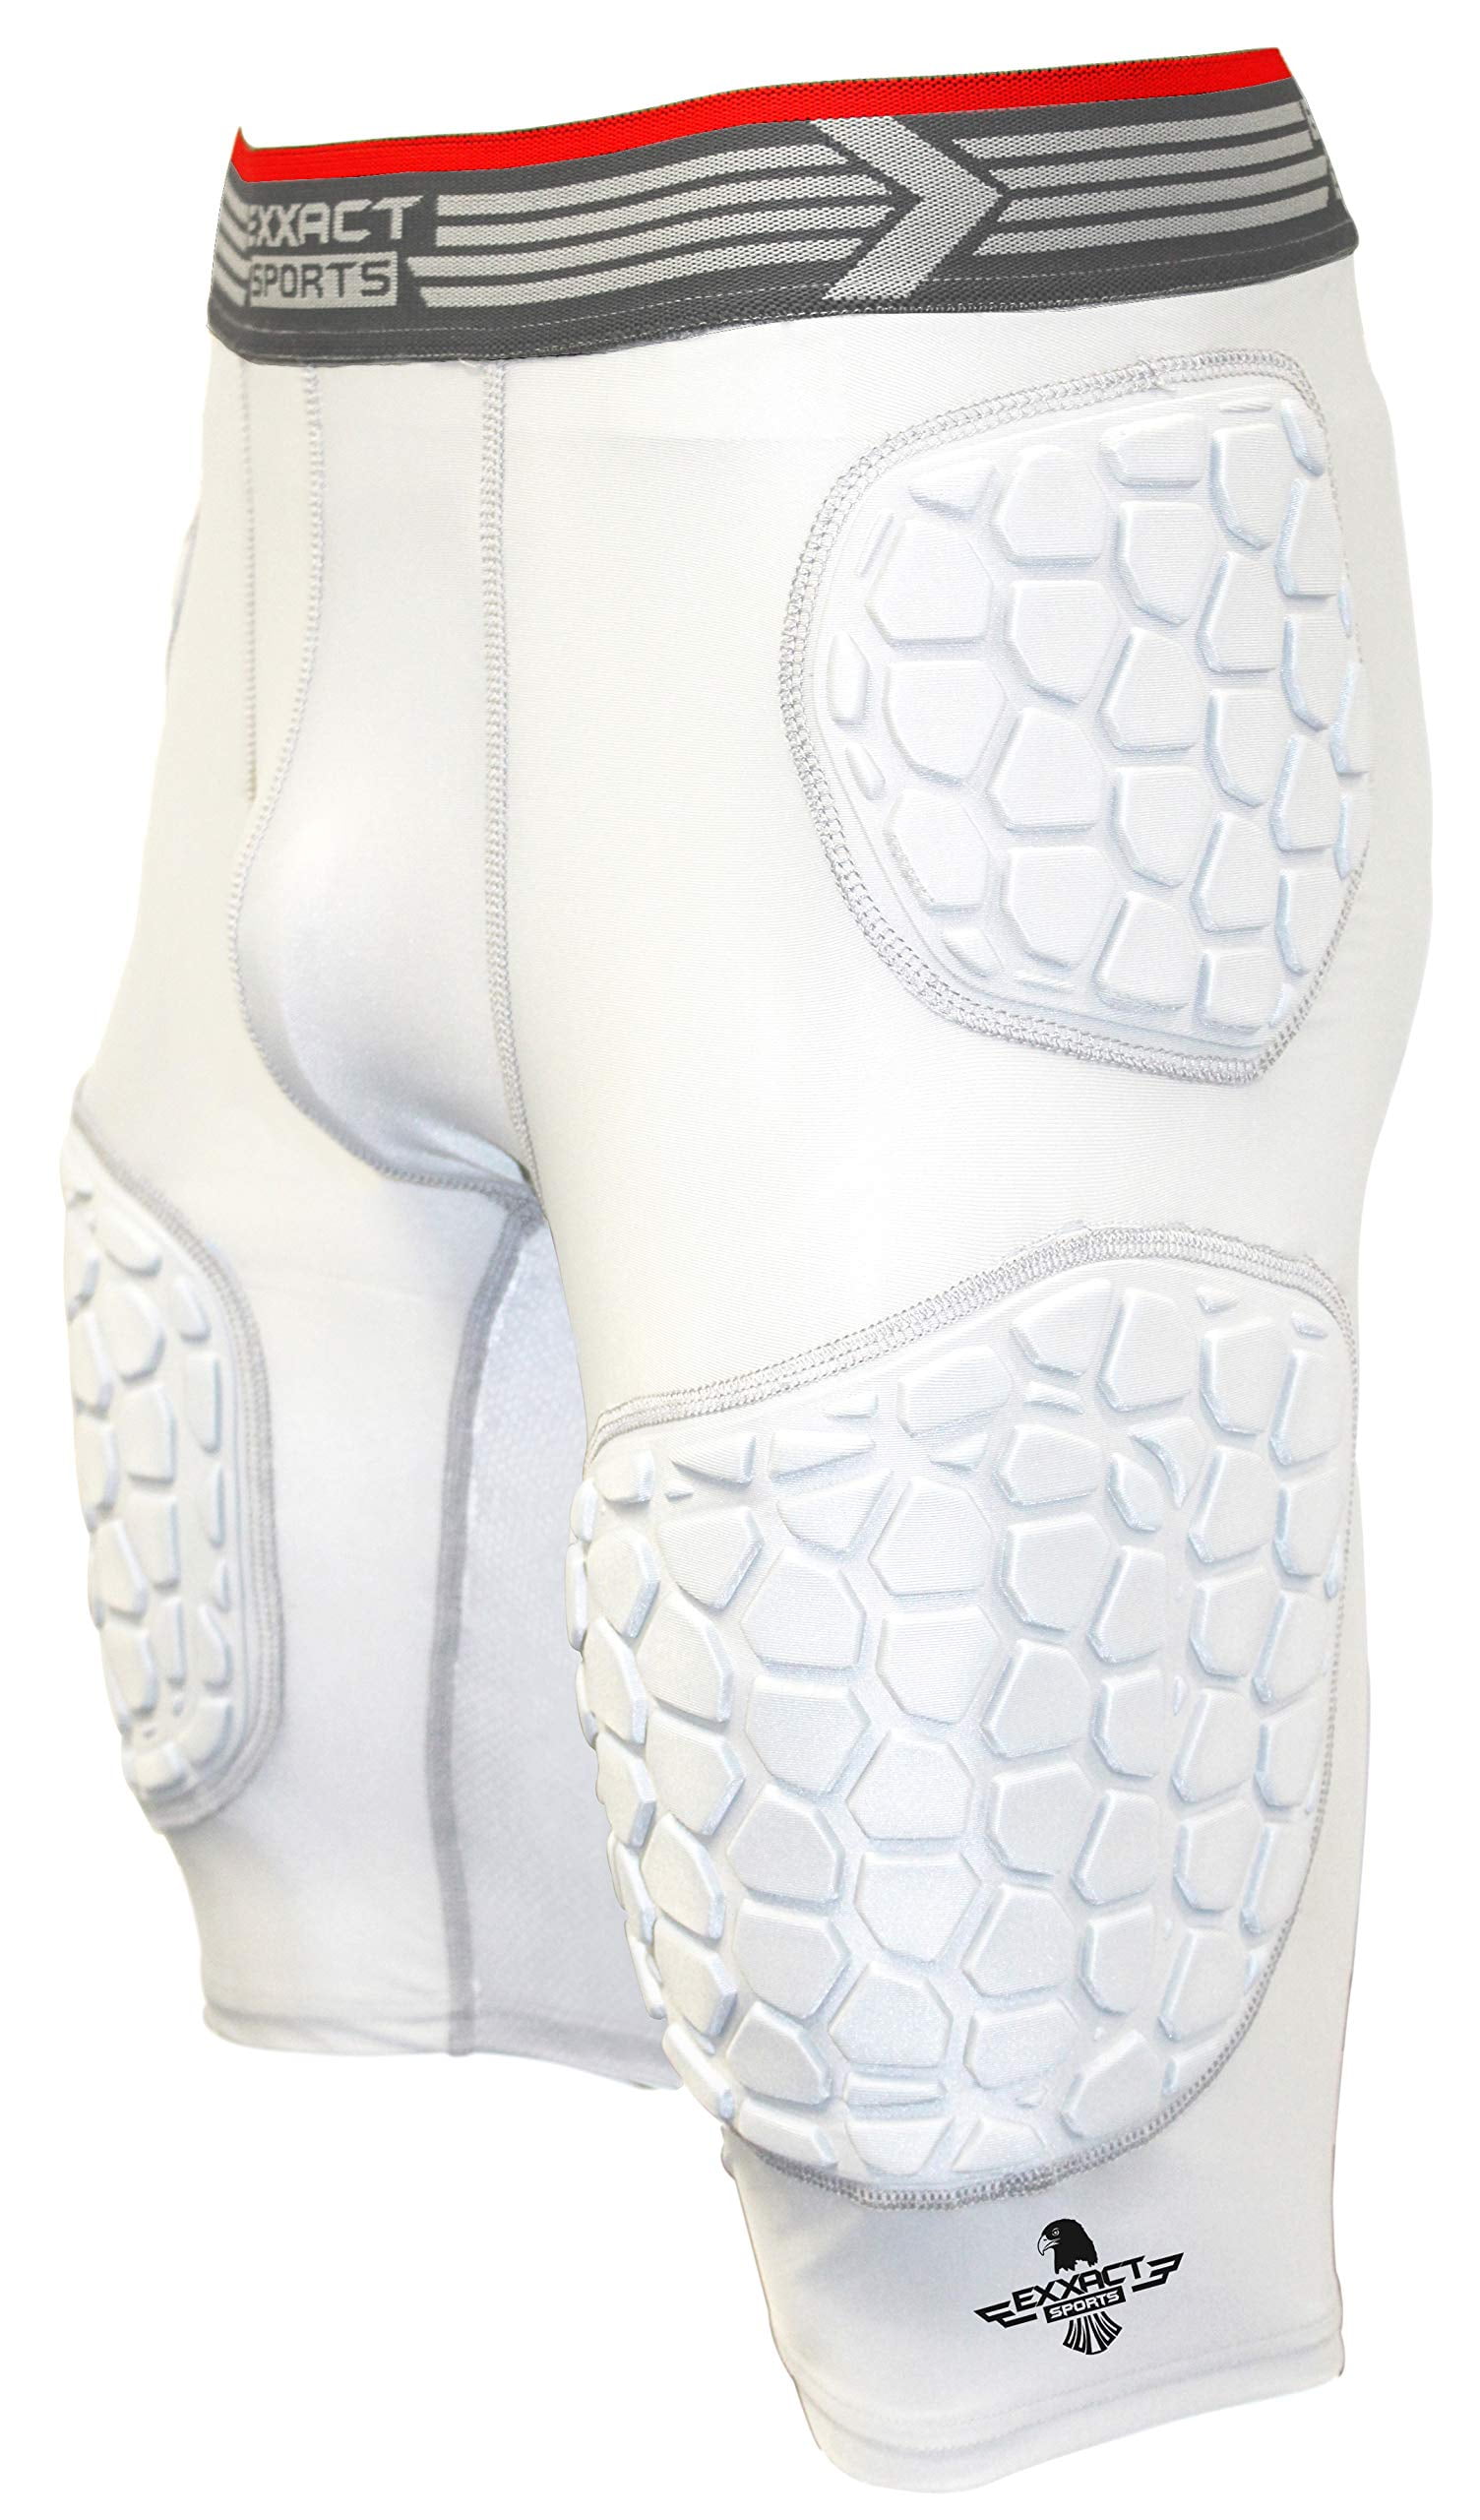 Exxact Sports 'Rebel' 5-Pad Adult Football Girdle w/Integrated Hip, Thighs  and Tailbone Pads, w/Cup Pocket | Compression, Integrated Football Pads and